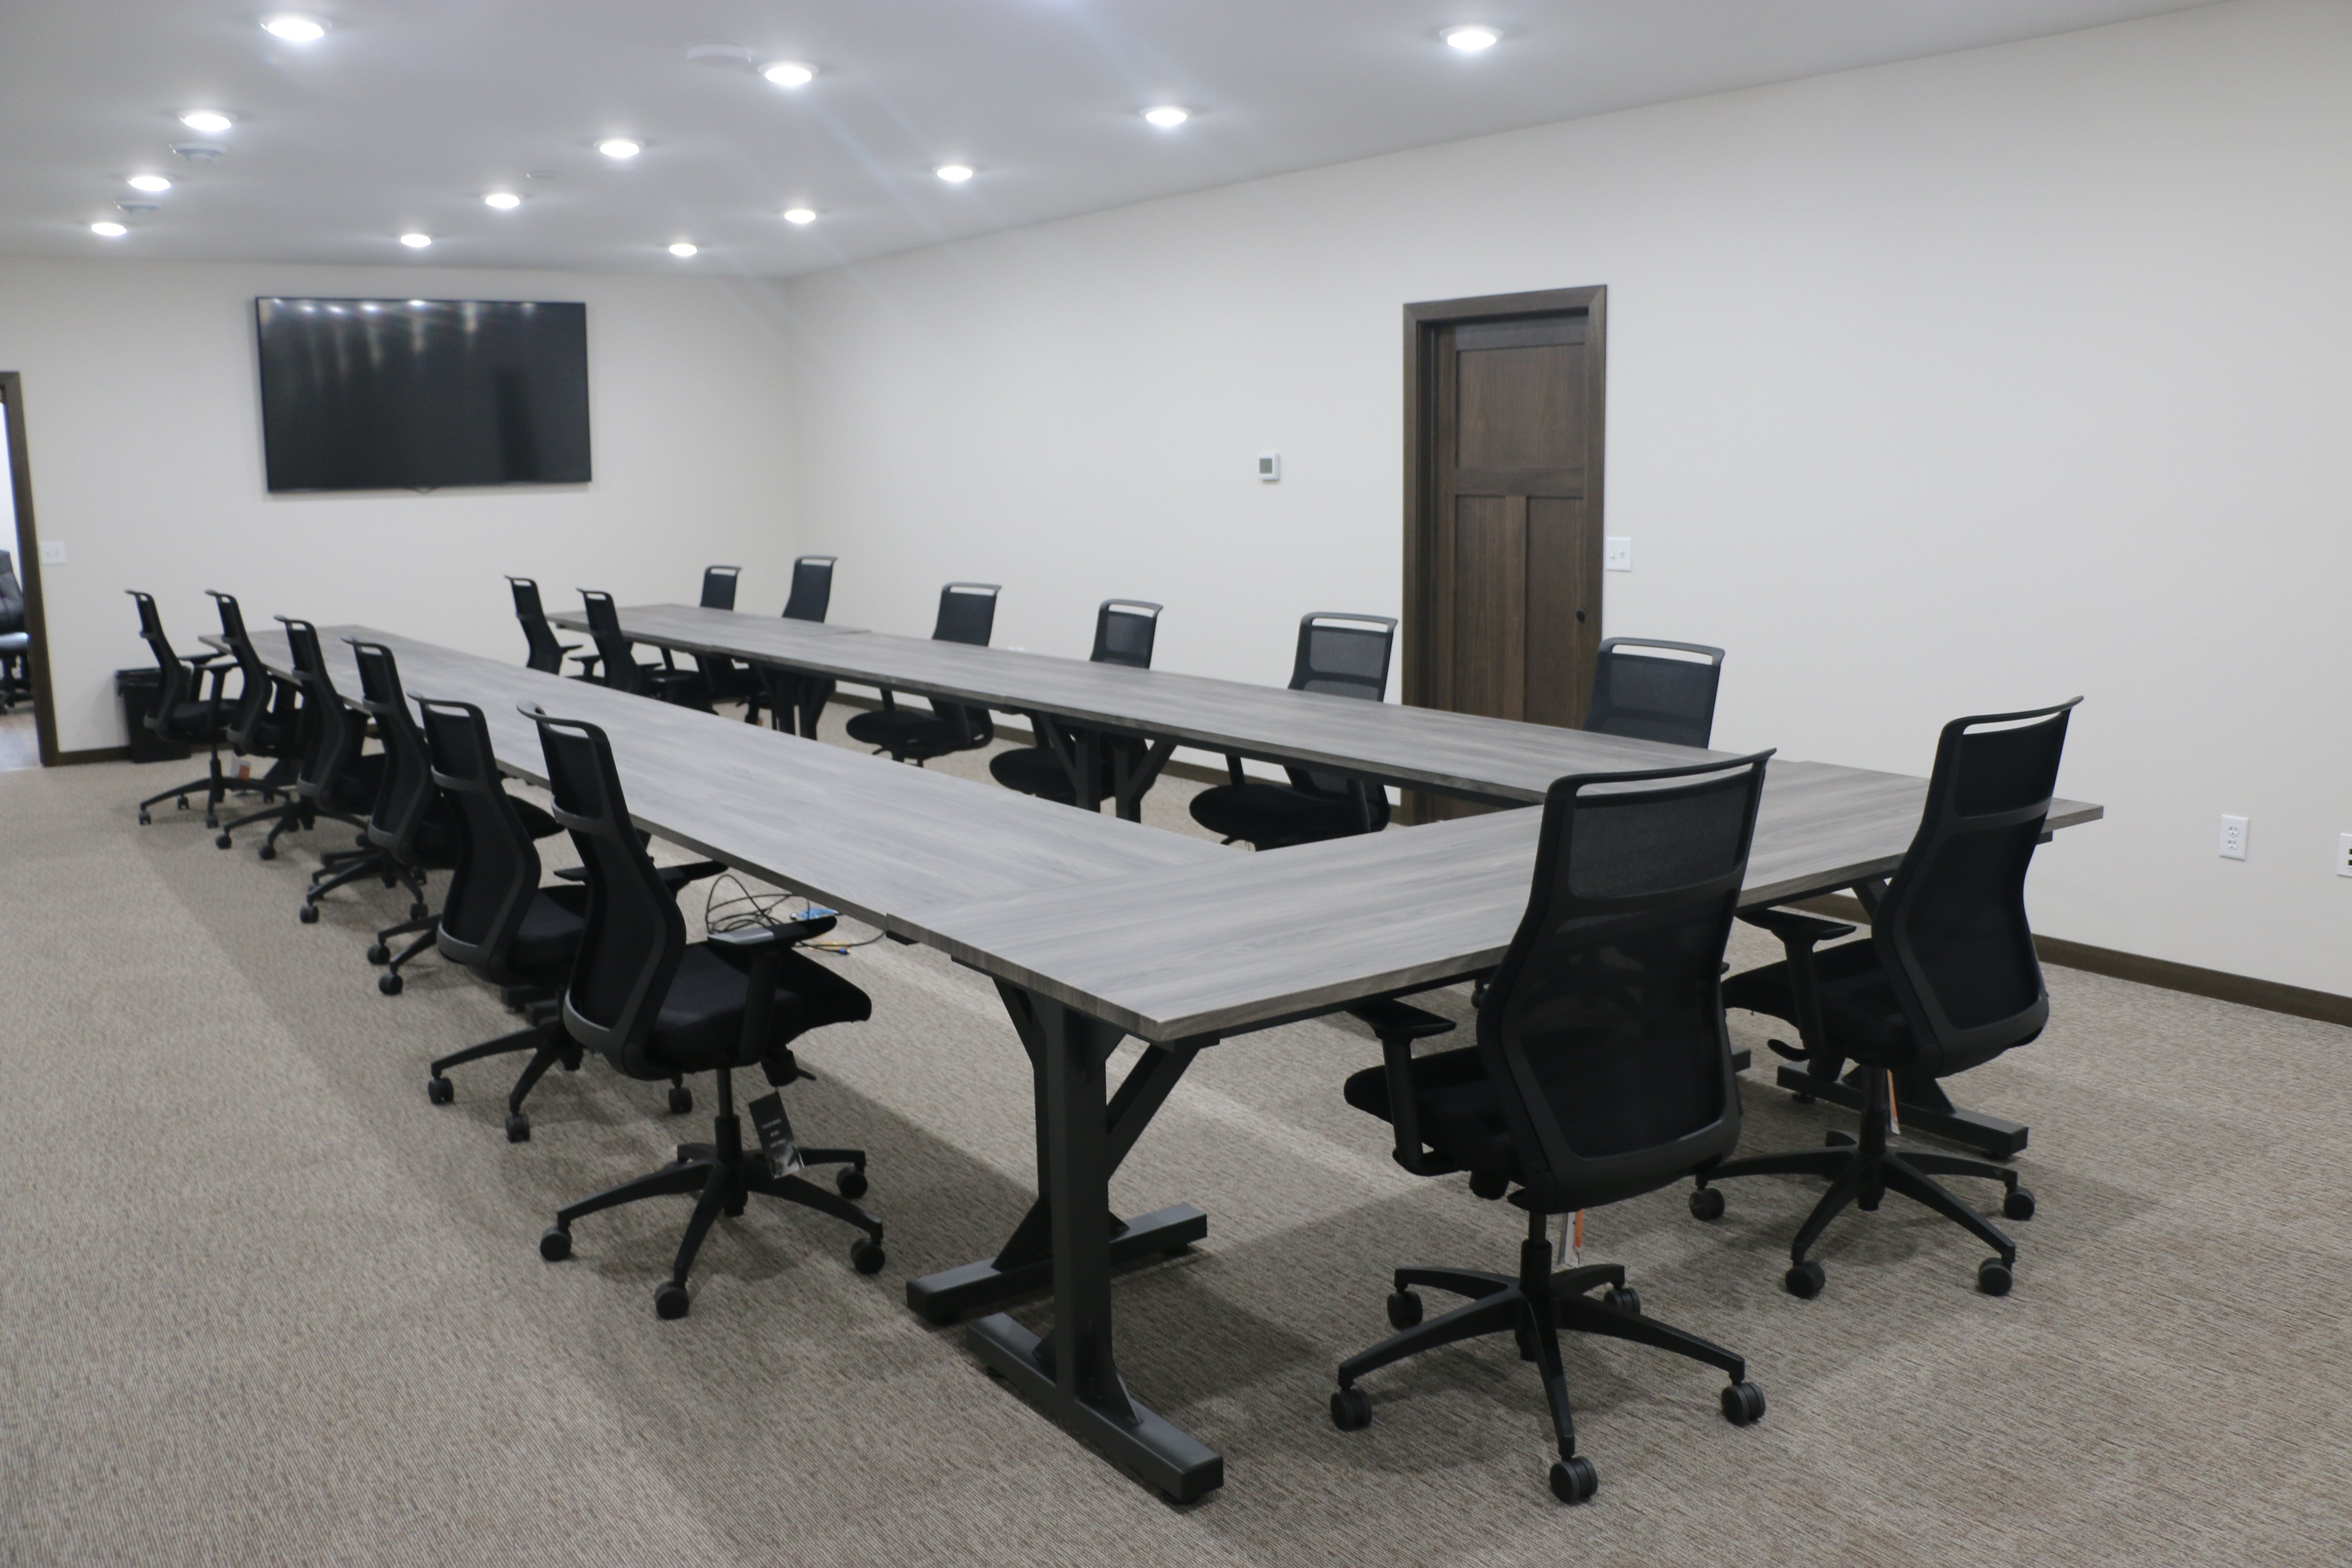 Which conference table suits you best?